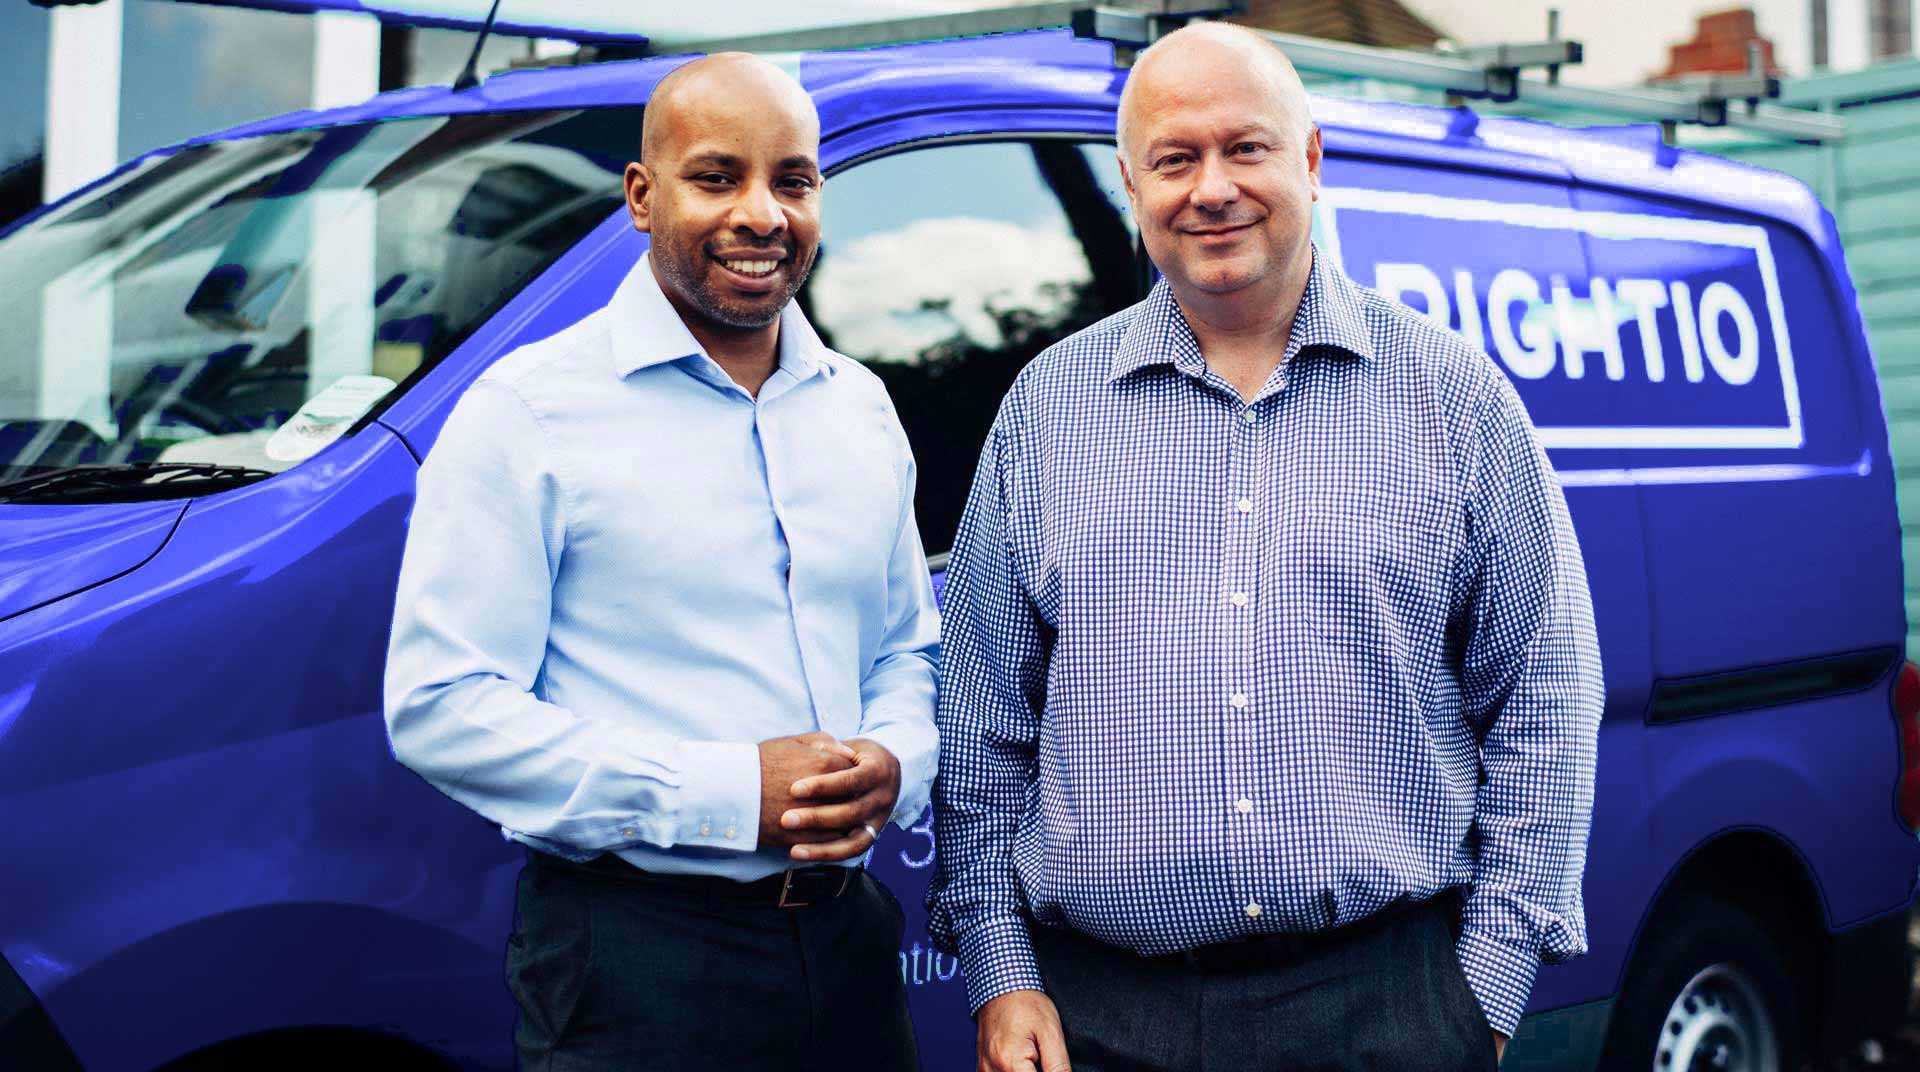 Chris Carswell and Karl Tulloch Standing in Front of Blue Rightio Van